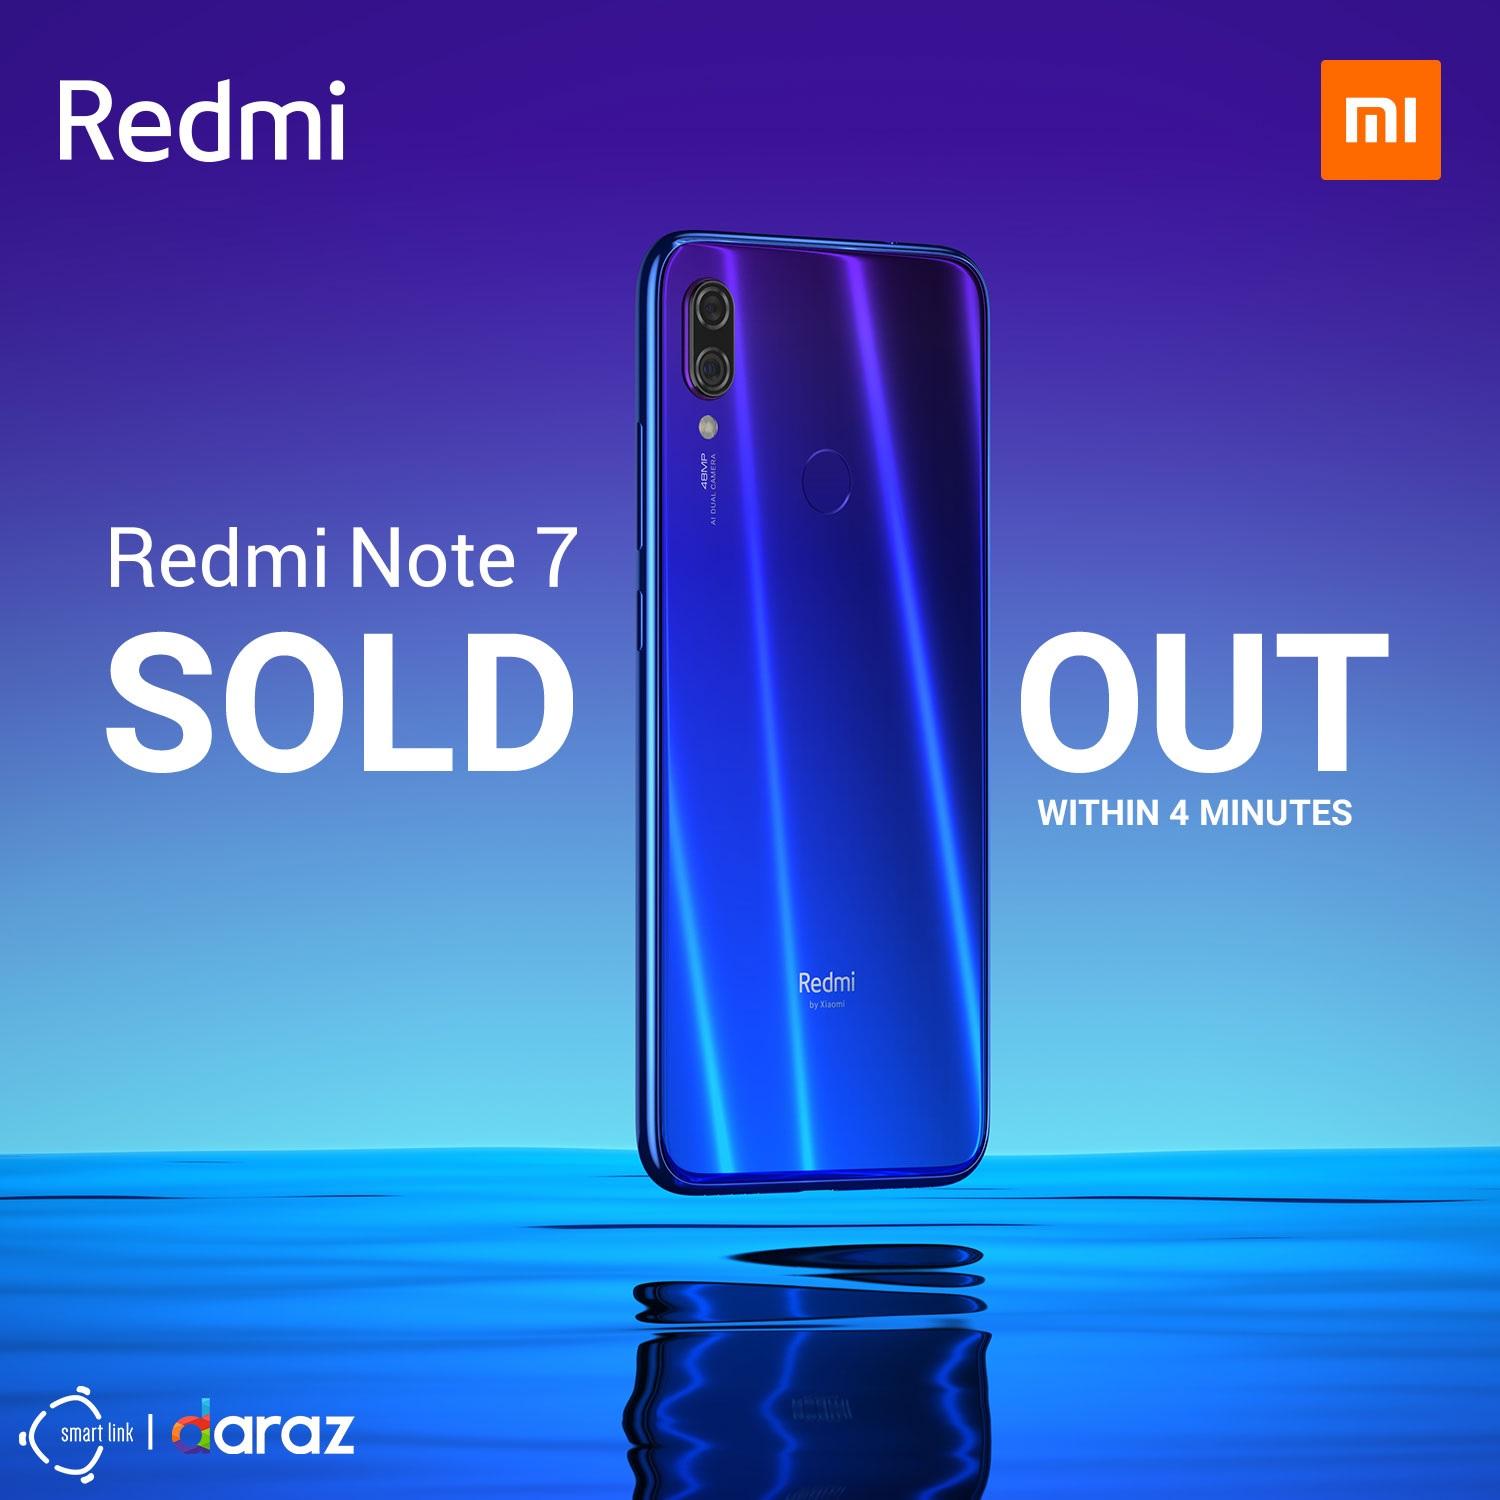 Redmi Note 7 Sold Out within 4 minutes at Flash Sale!